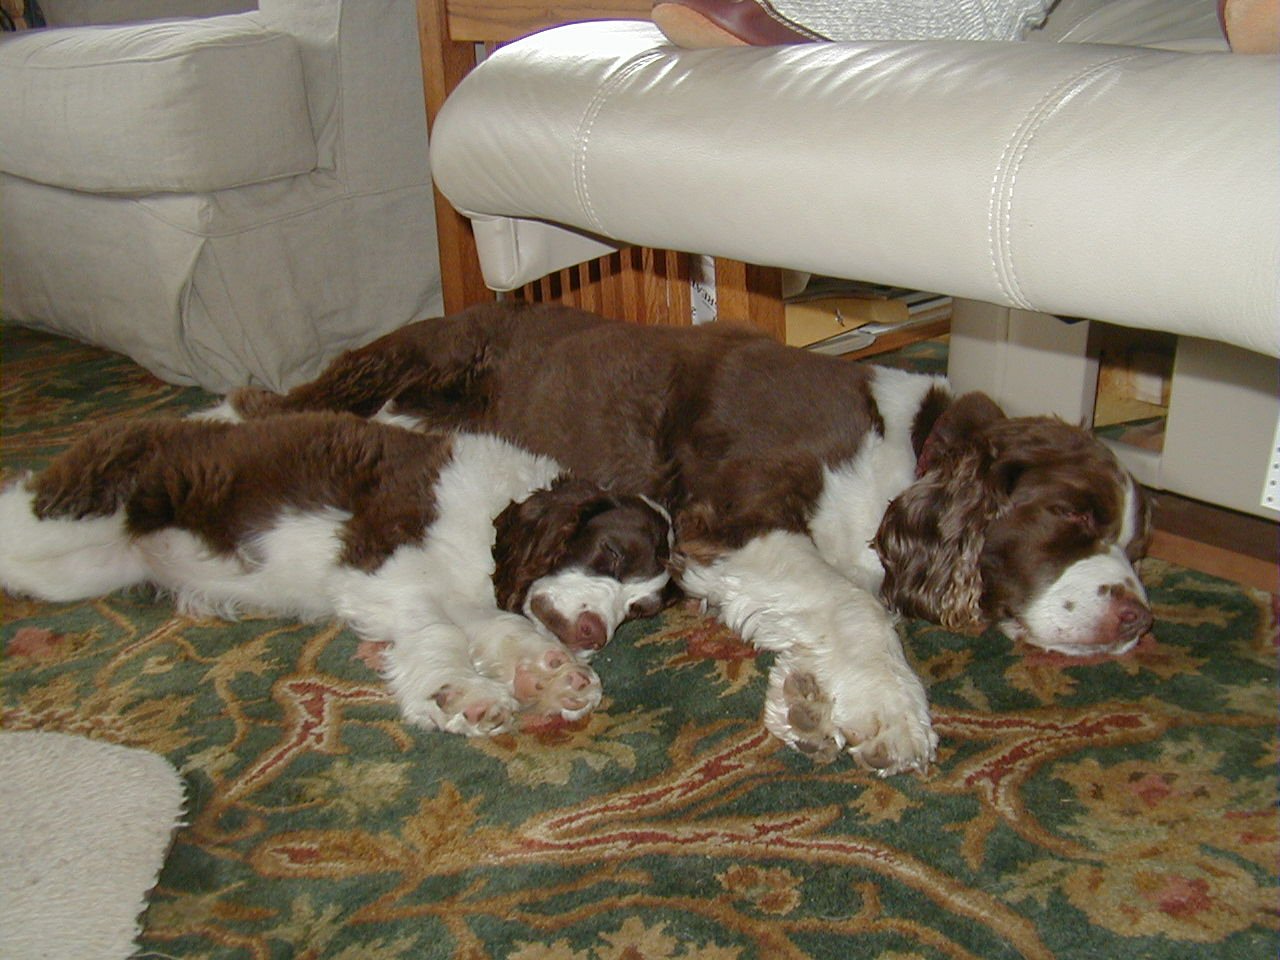 English Springer Spaniels puppy and older dog sleeping